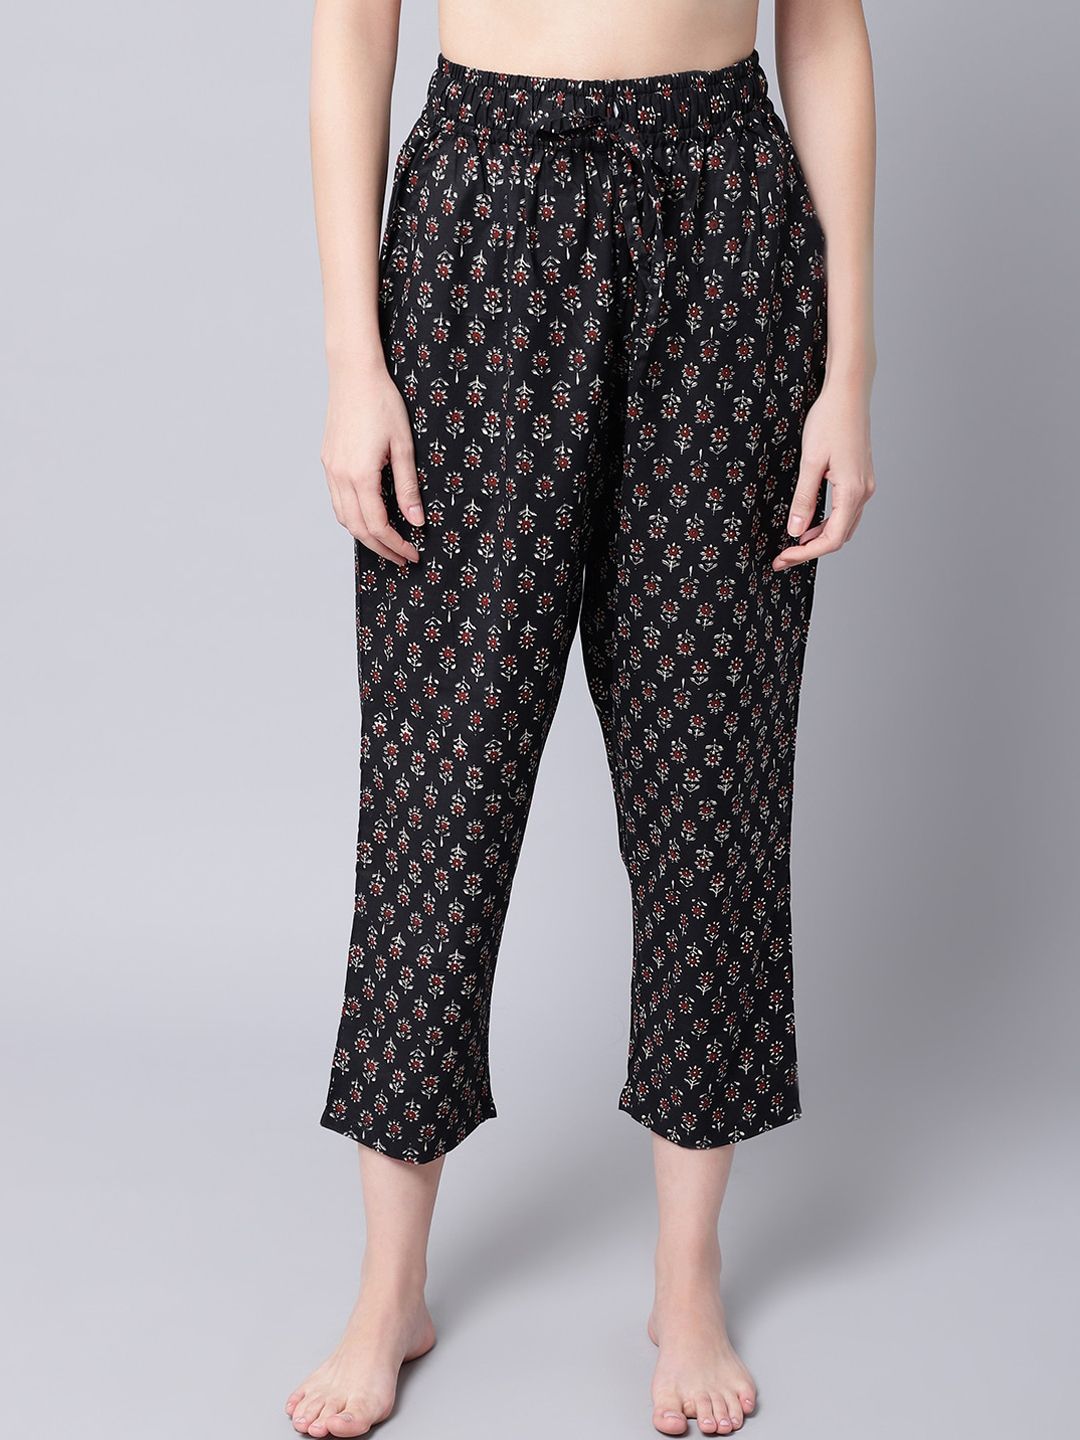 TAG 7 Women Black & Maroon Printed Cotton Comfort-Fit Lounge Pant Price in India